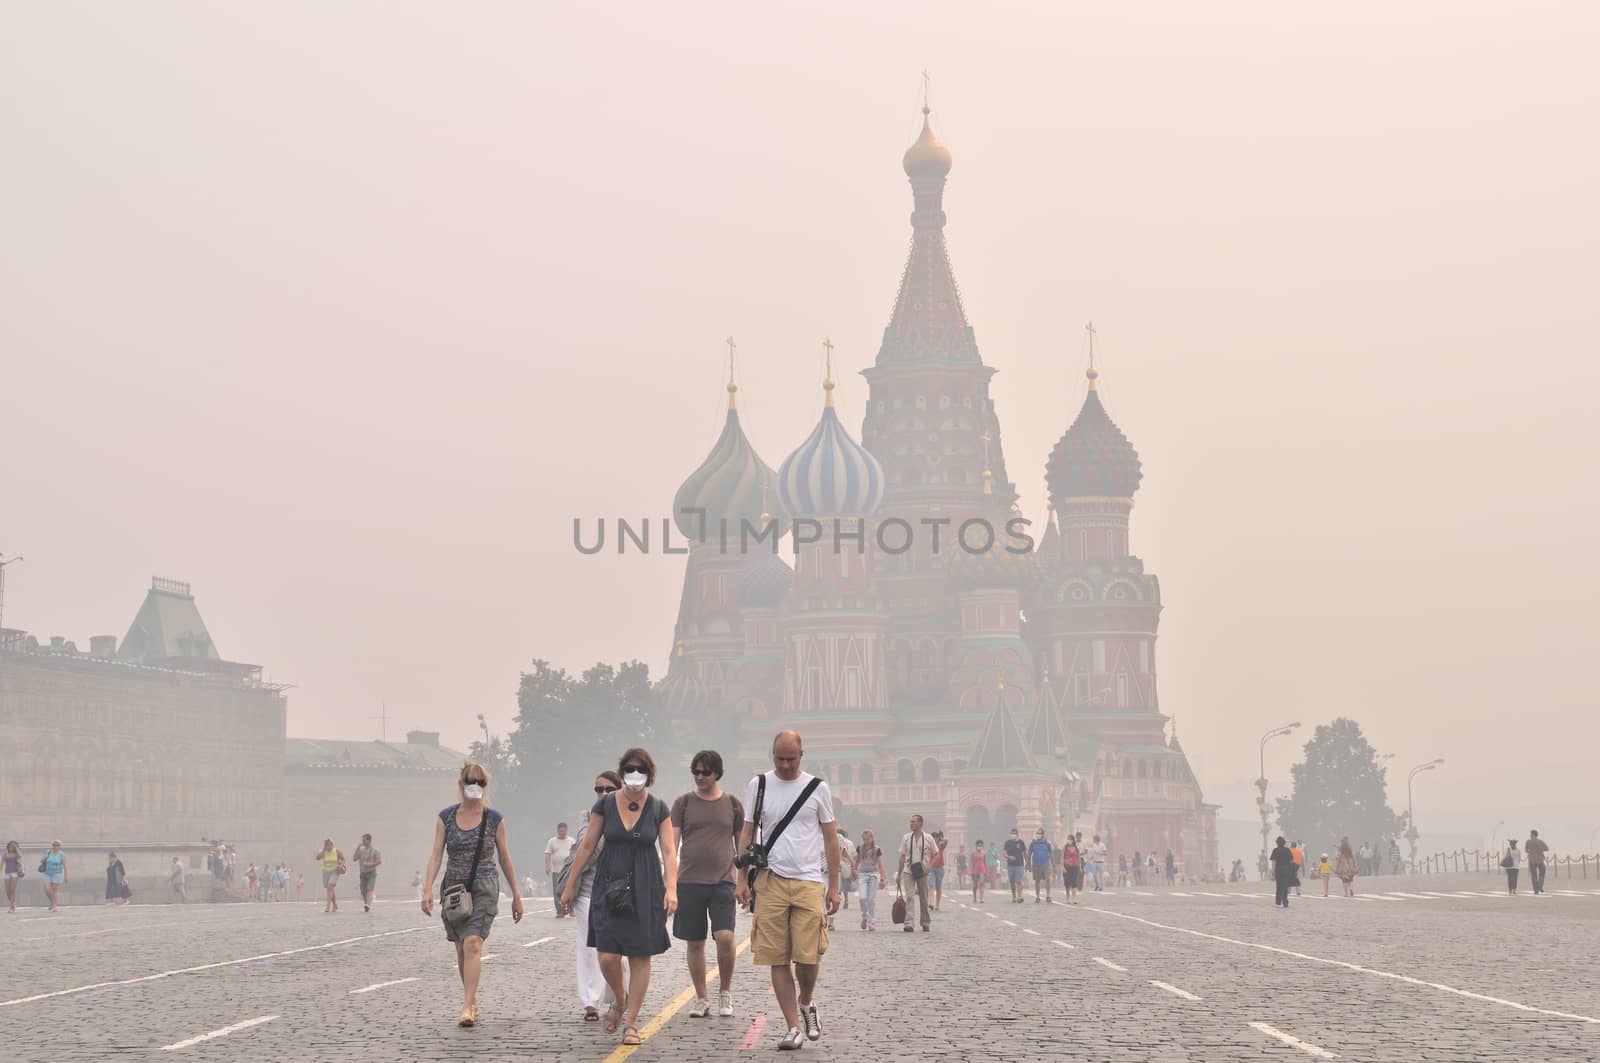 Tourists in gas mask on Red Square under the smog, Moscow, August 9, 2010 by wander